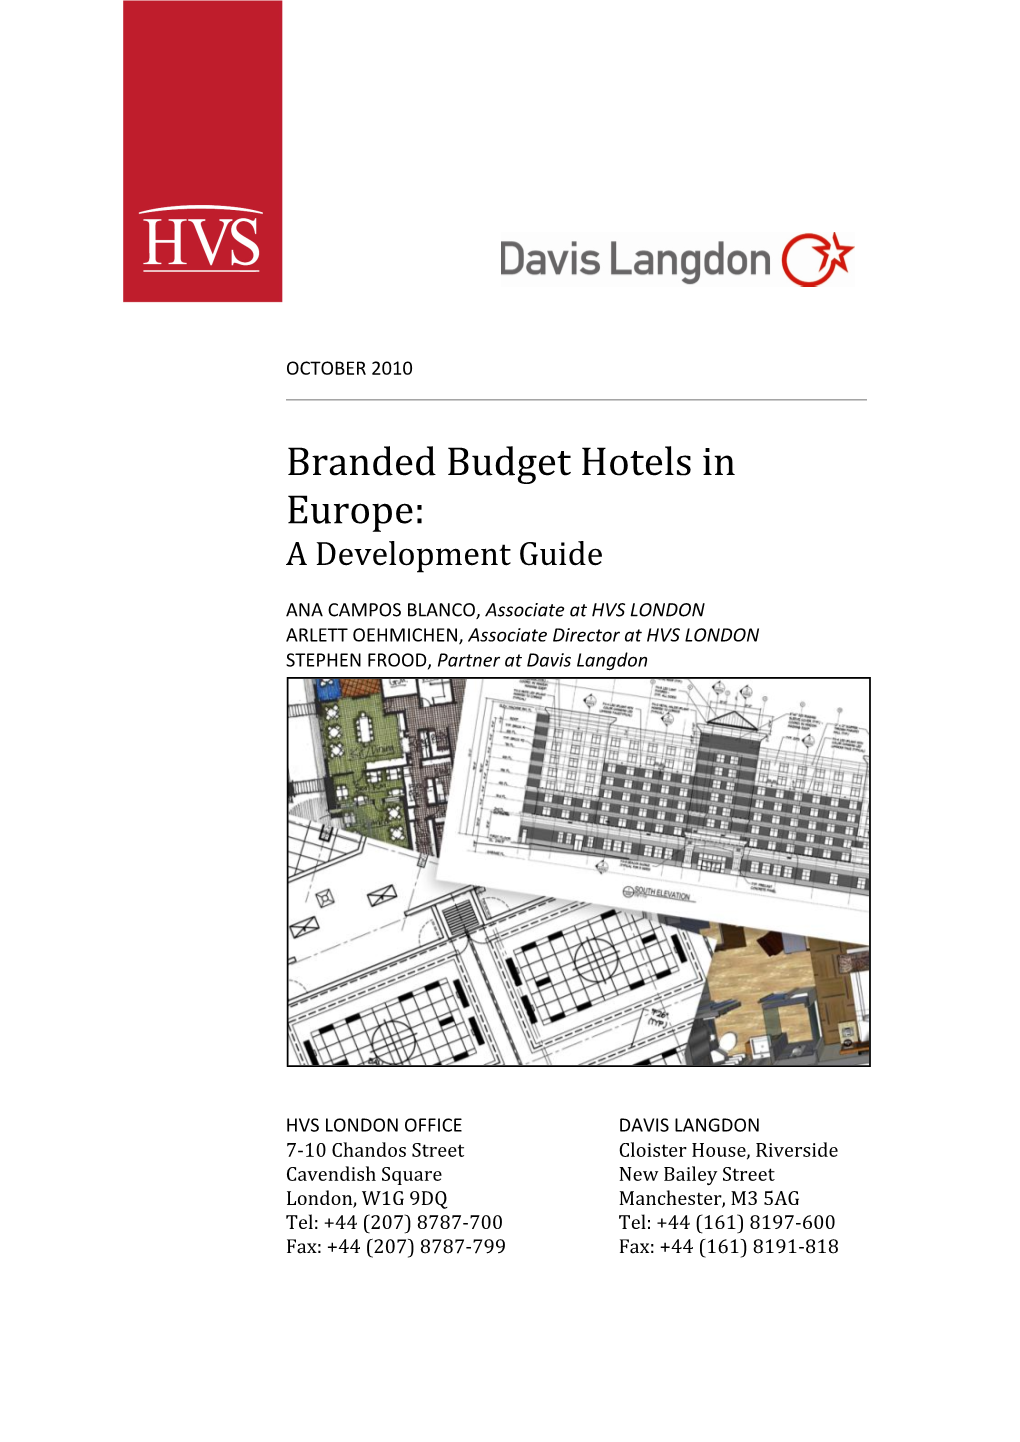 Branded Budget Hotels in Europe: a Development Guide